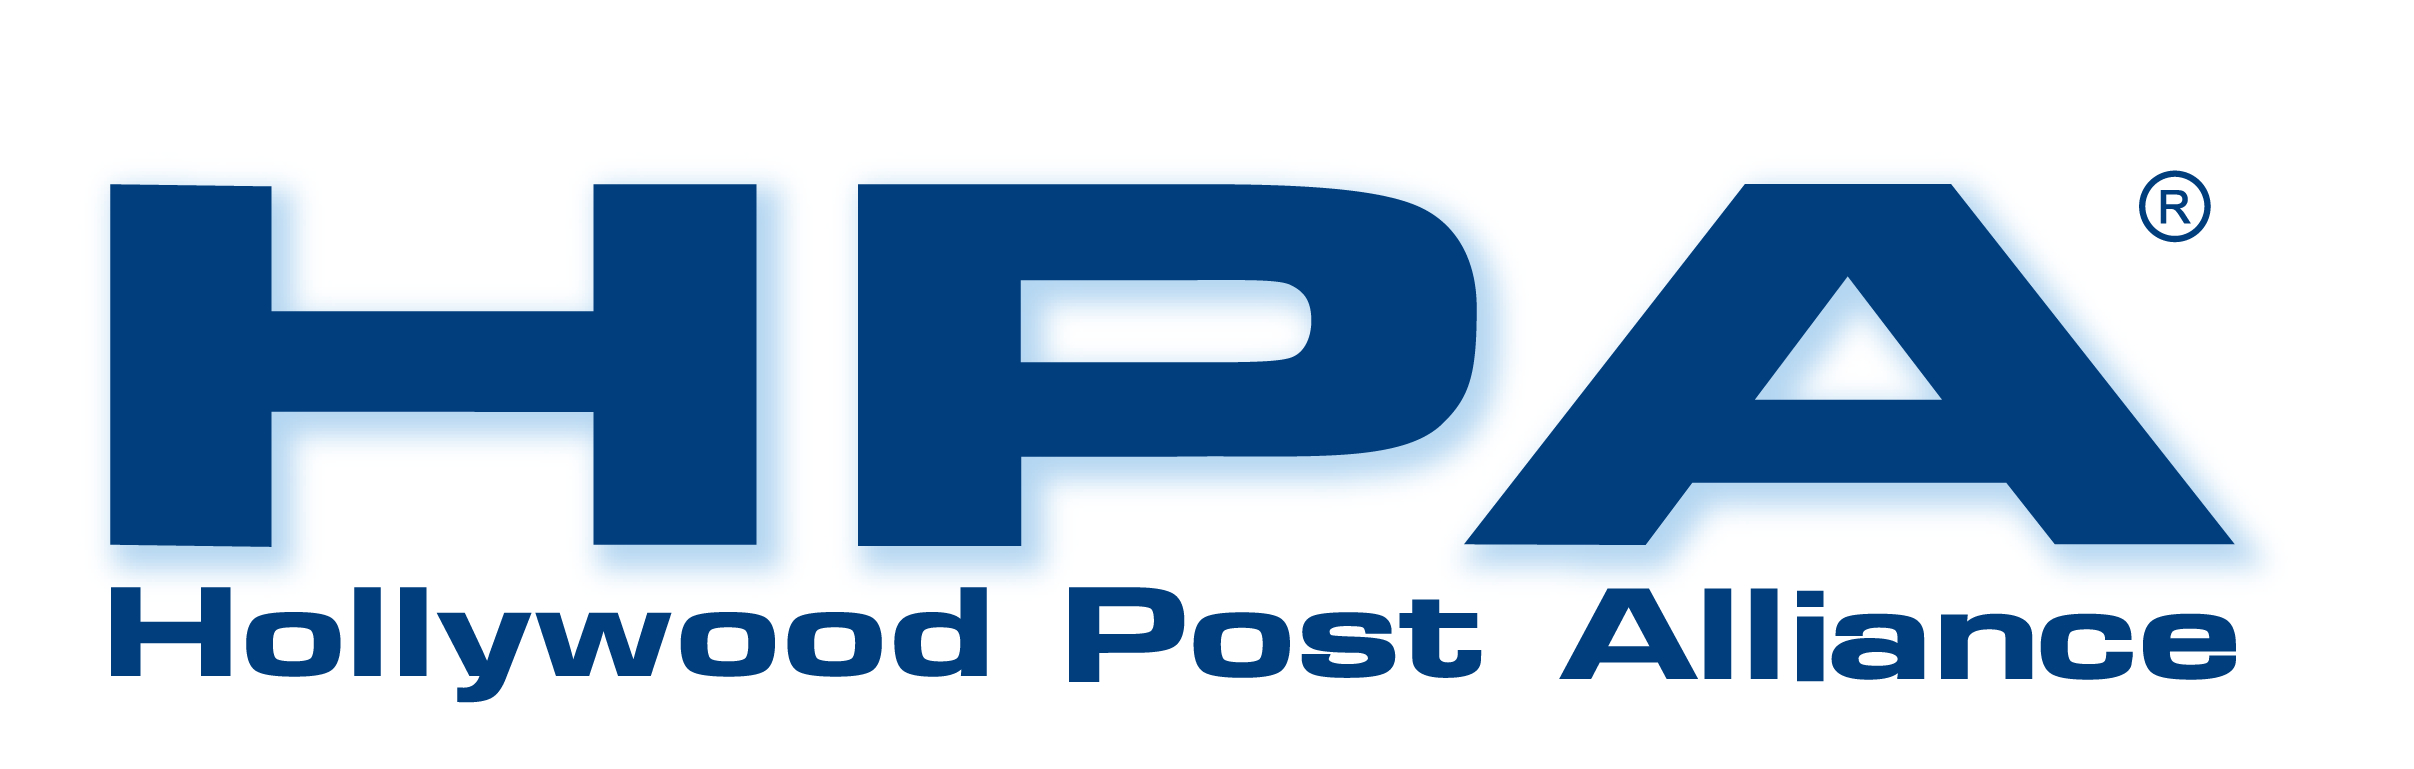 Hollywood Post Alliance (HPA) Logo